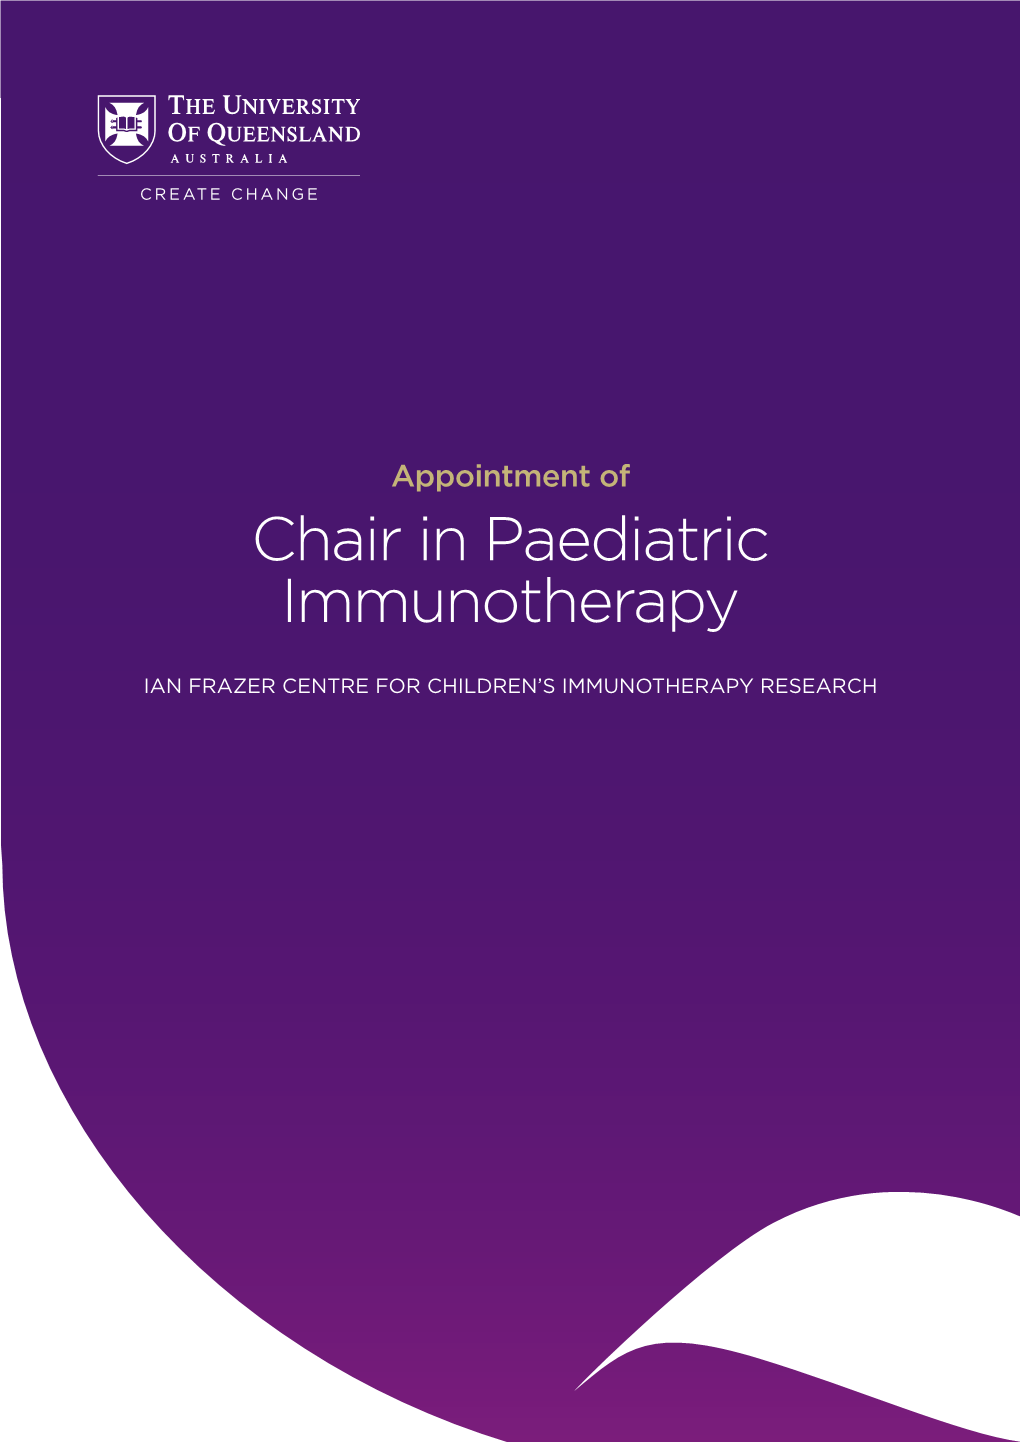 Chair in Paediatric Immunotherapy